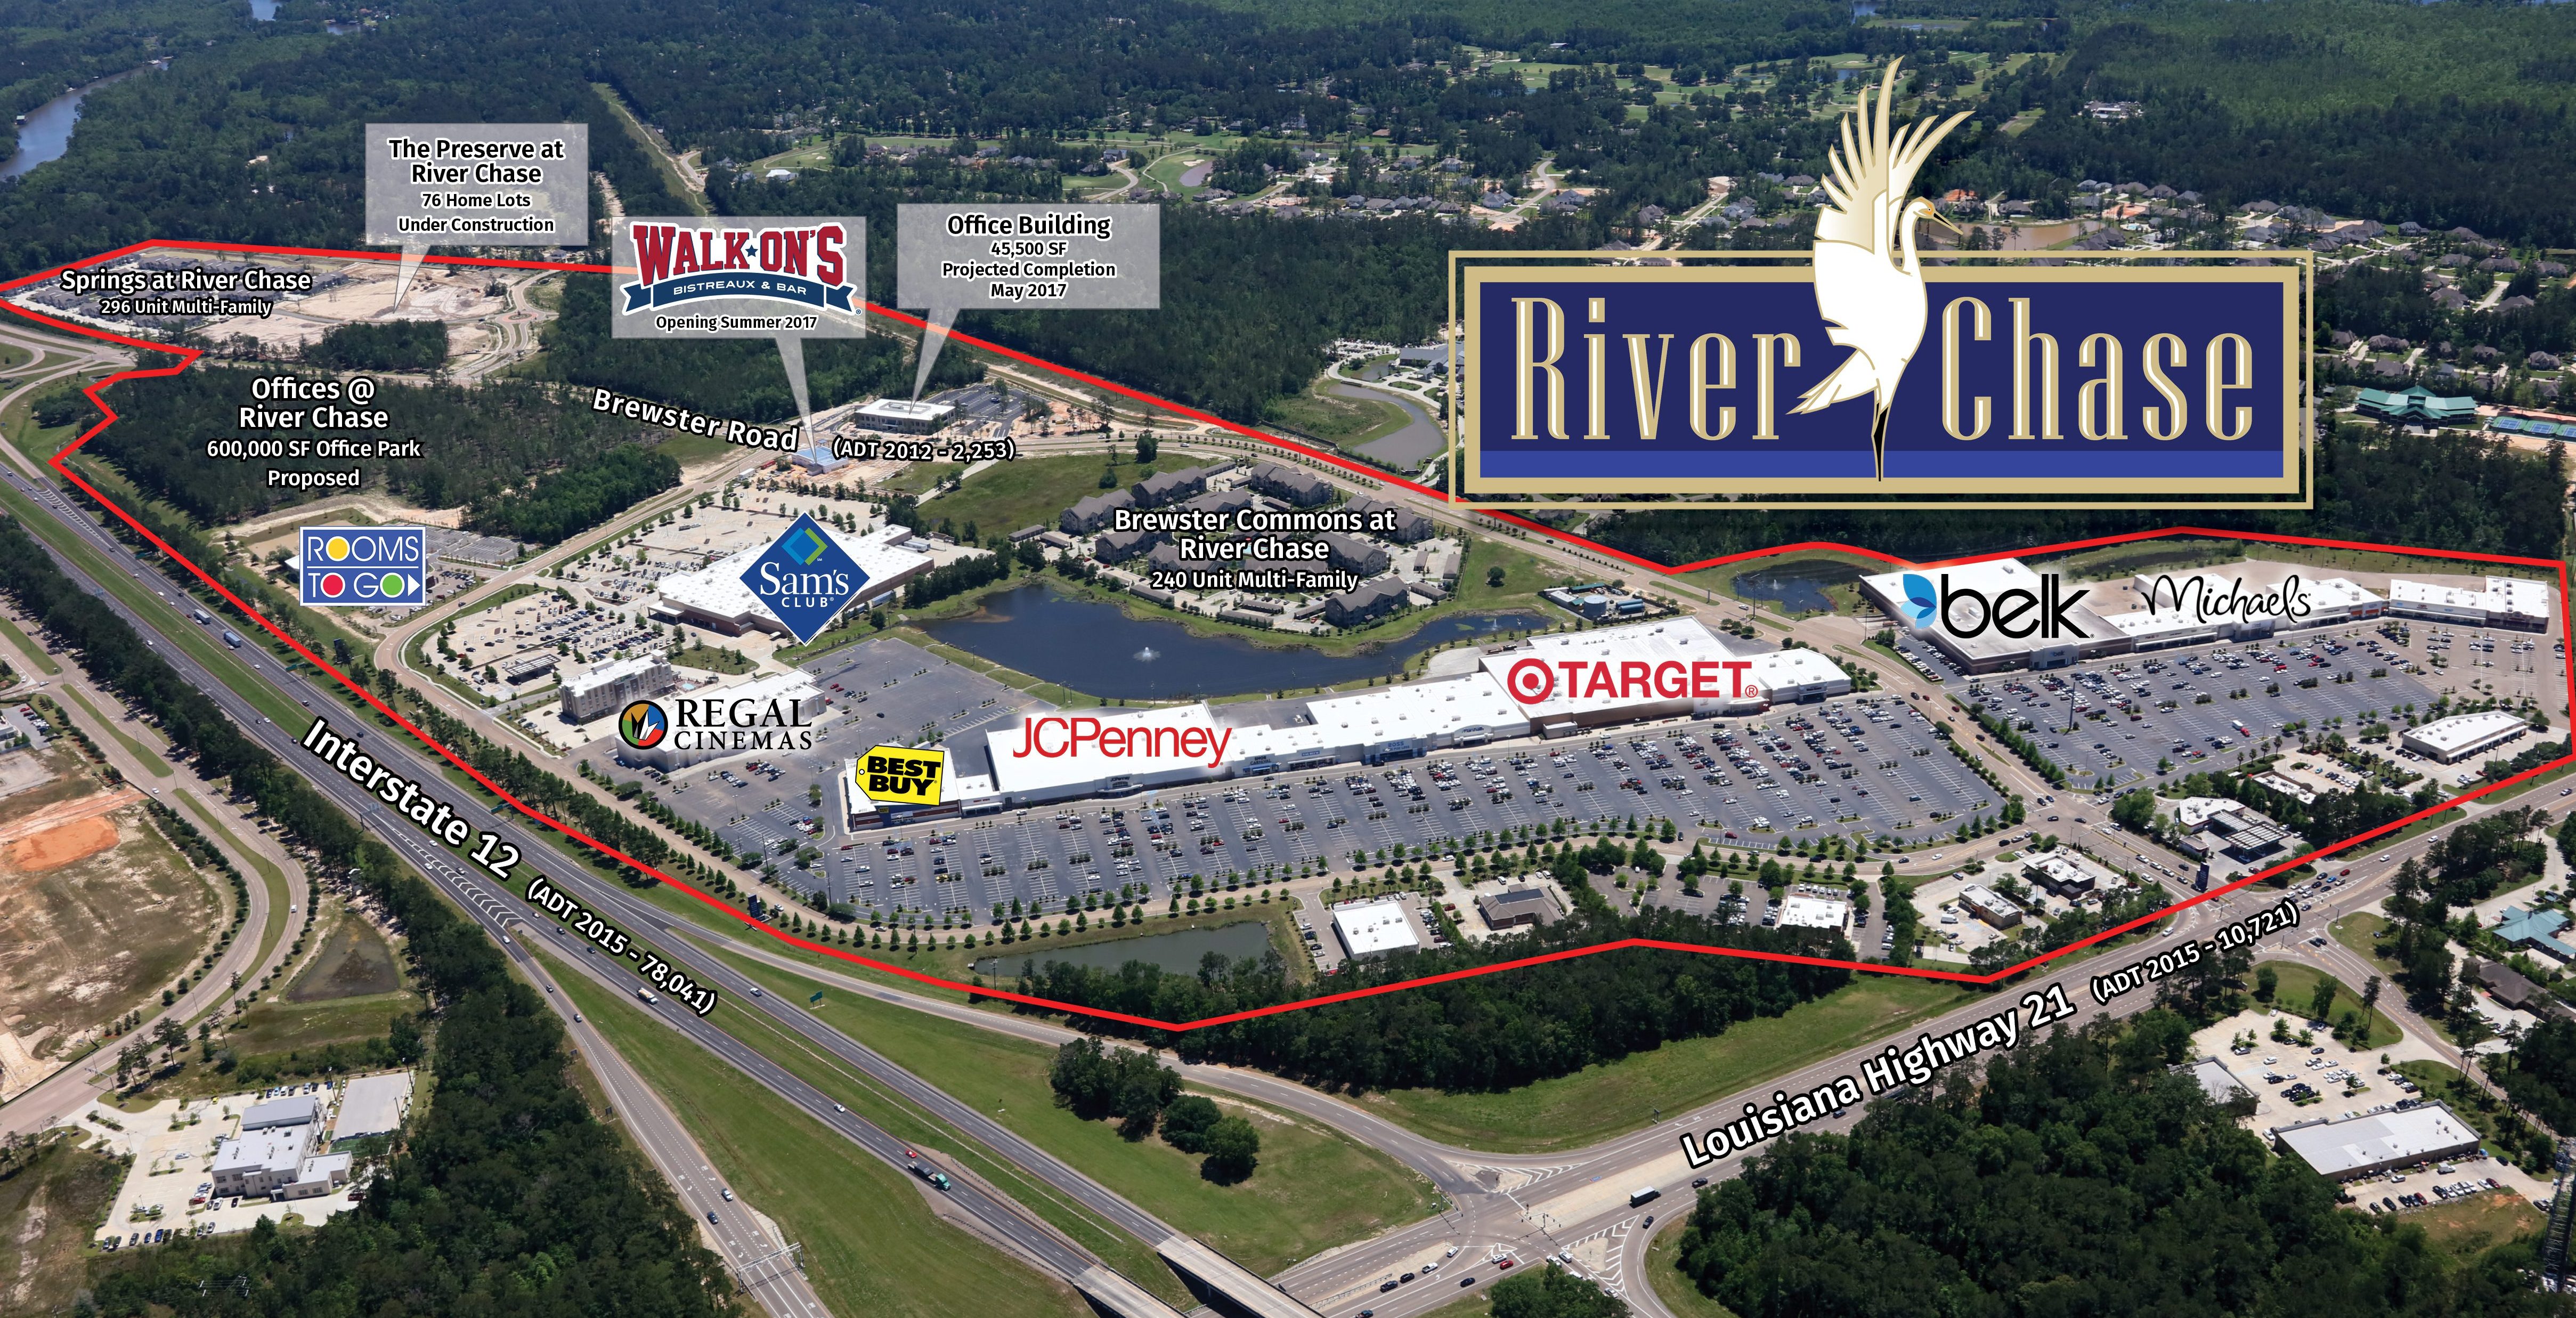 River Chase Mixed-Use Development